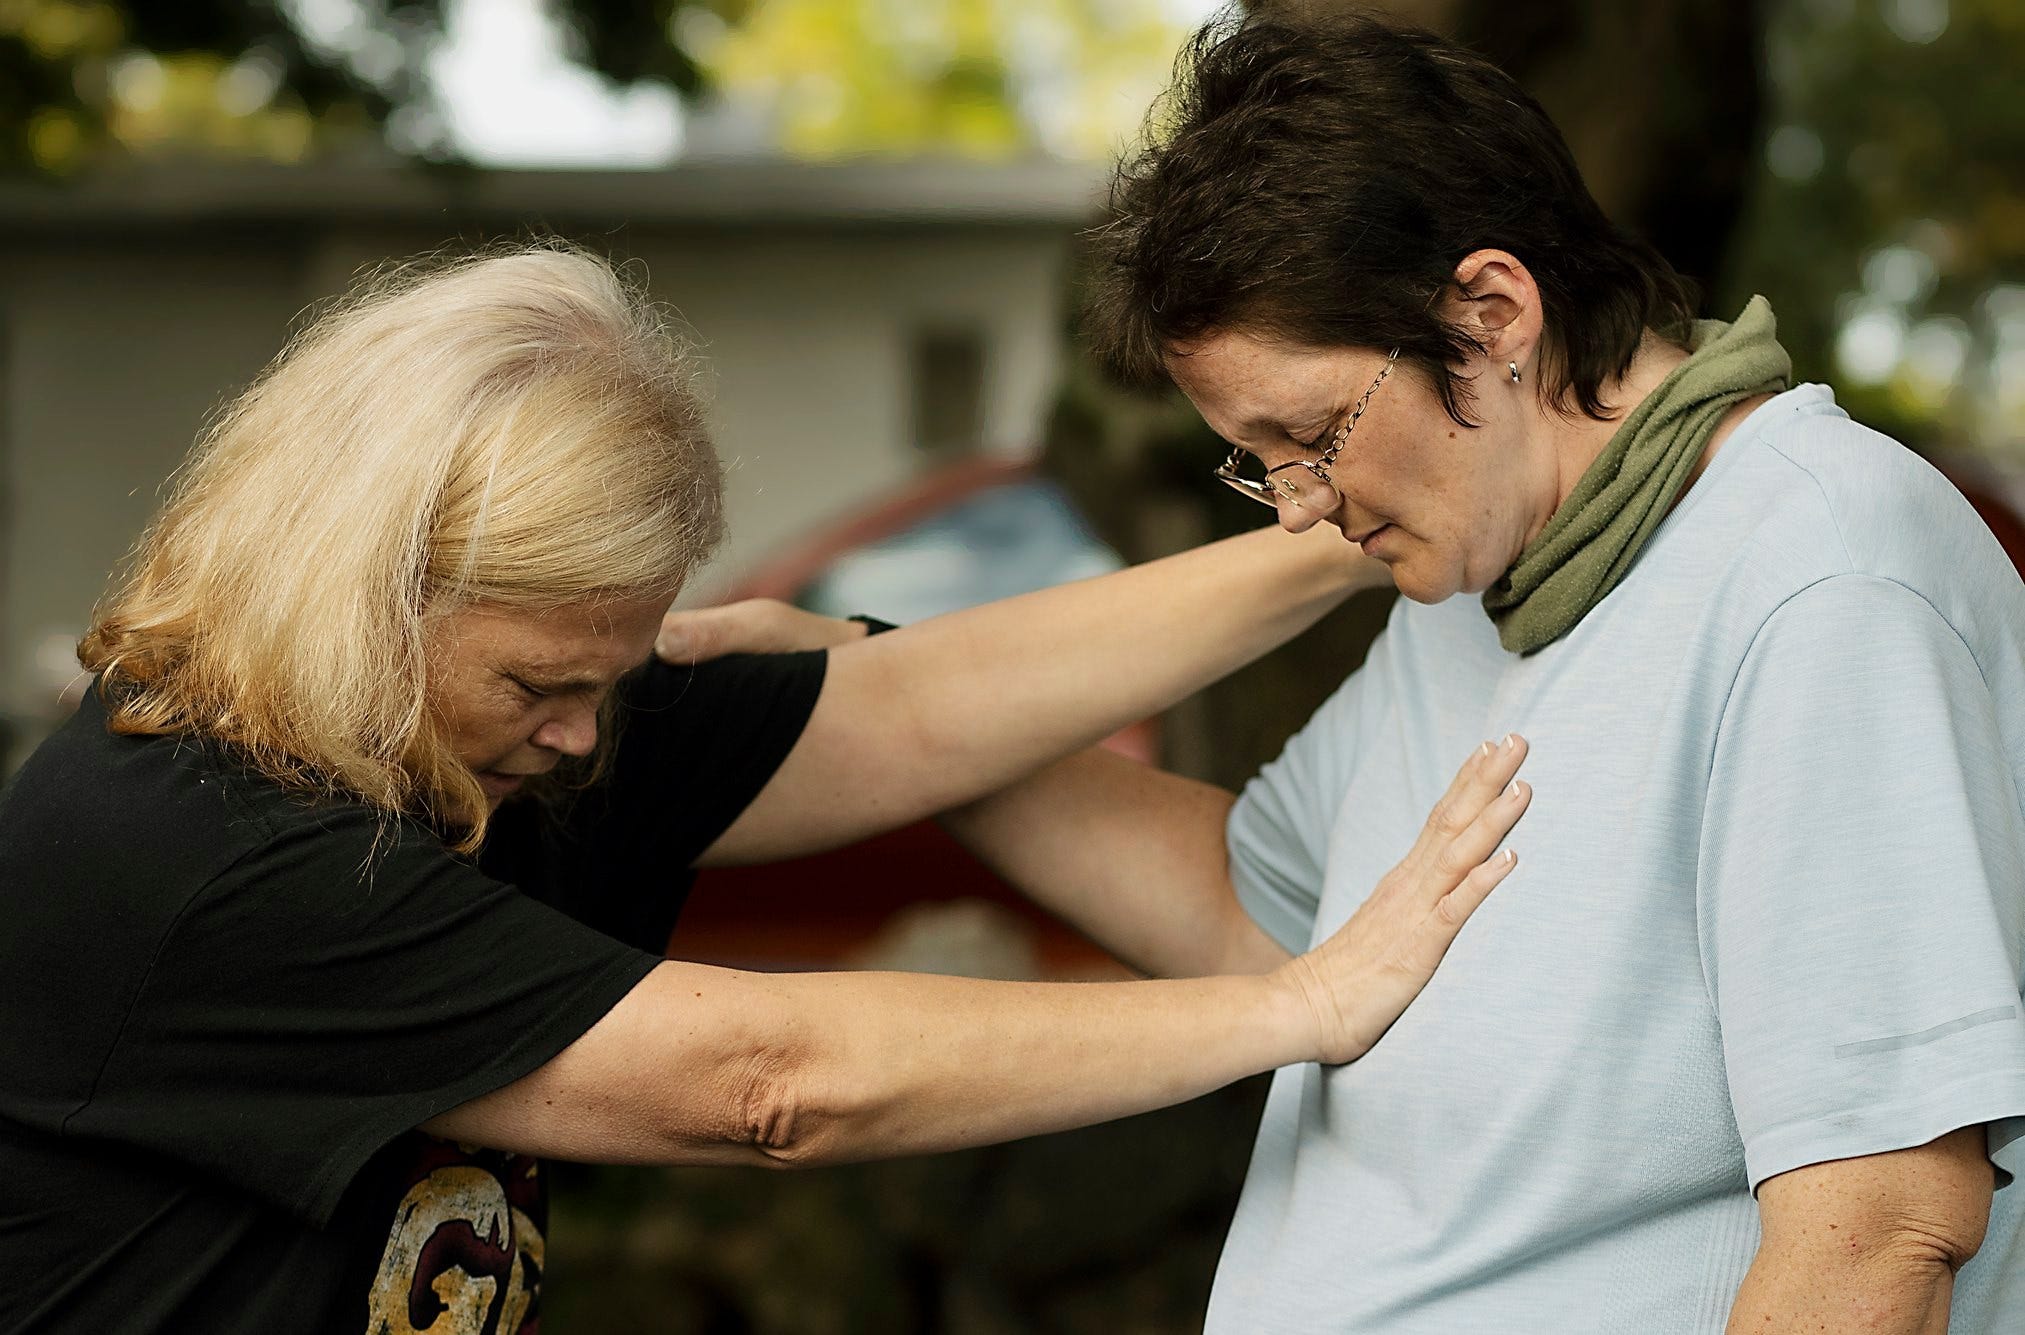 Two days before reunifying with her son, Jack, Kyrstal Hartman, right, prayed with friend, Cheryl Carbone, in July outside the transitional housing Kyrstal was living in at the time.